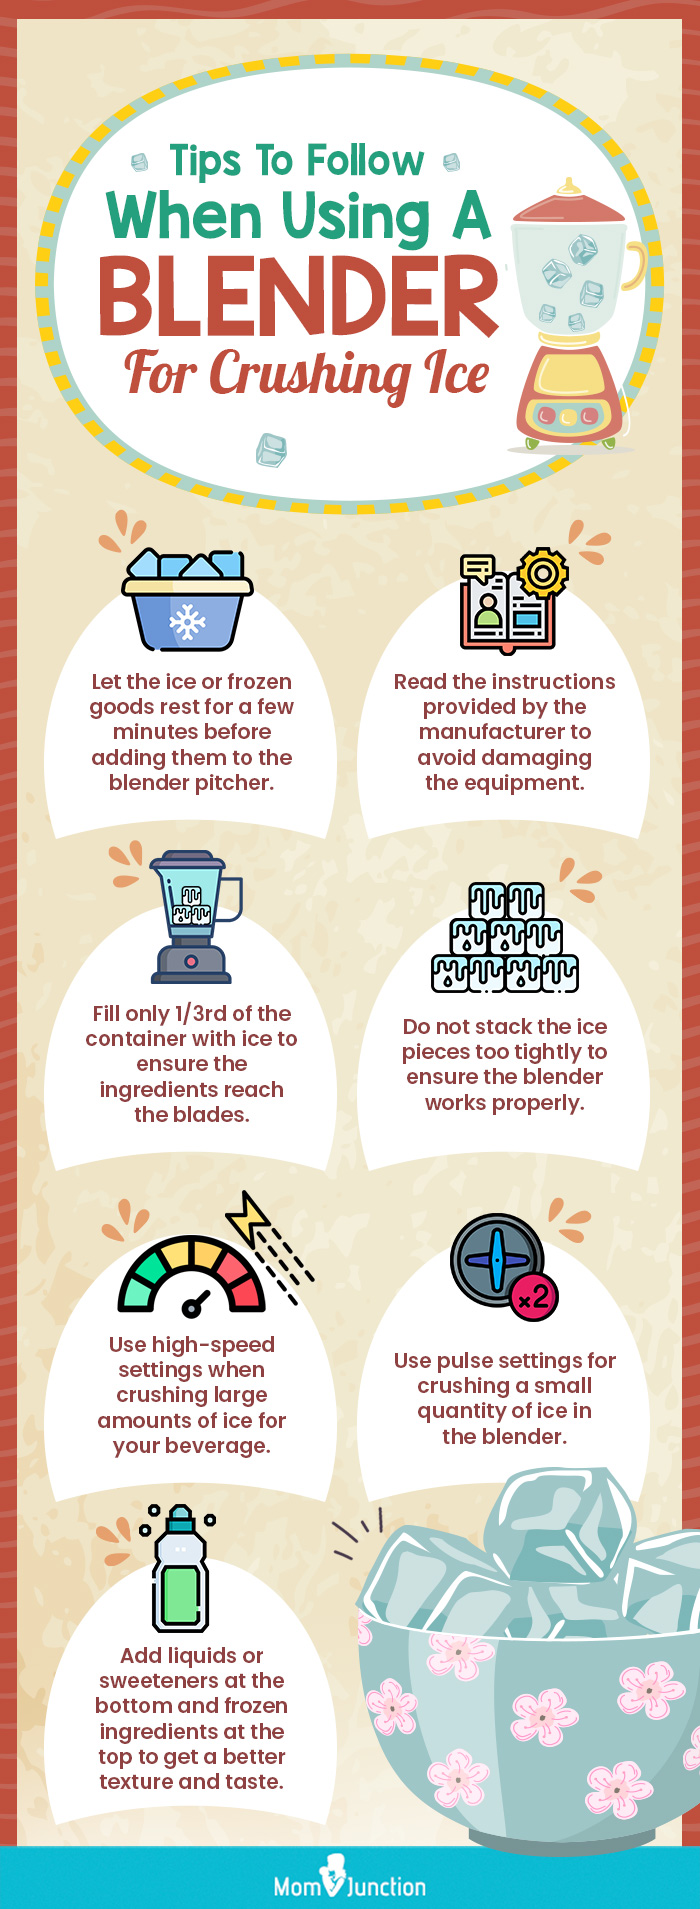 Tips To Follow When Using A Blender For Crushing Ice (infographic)